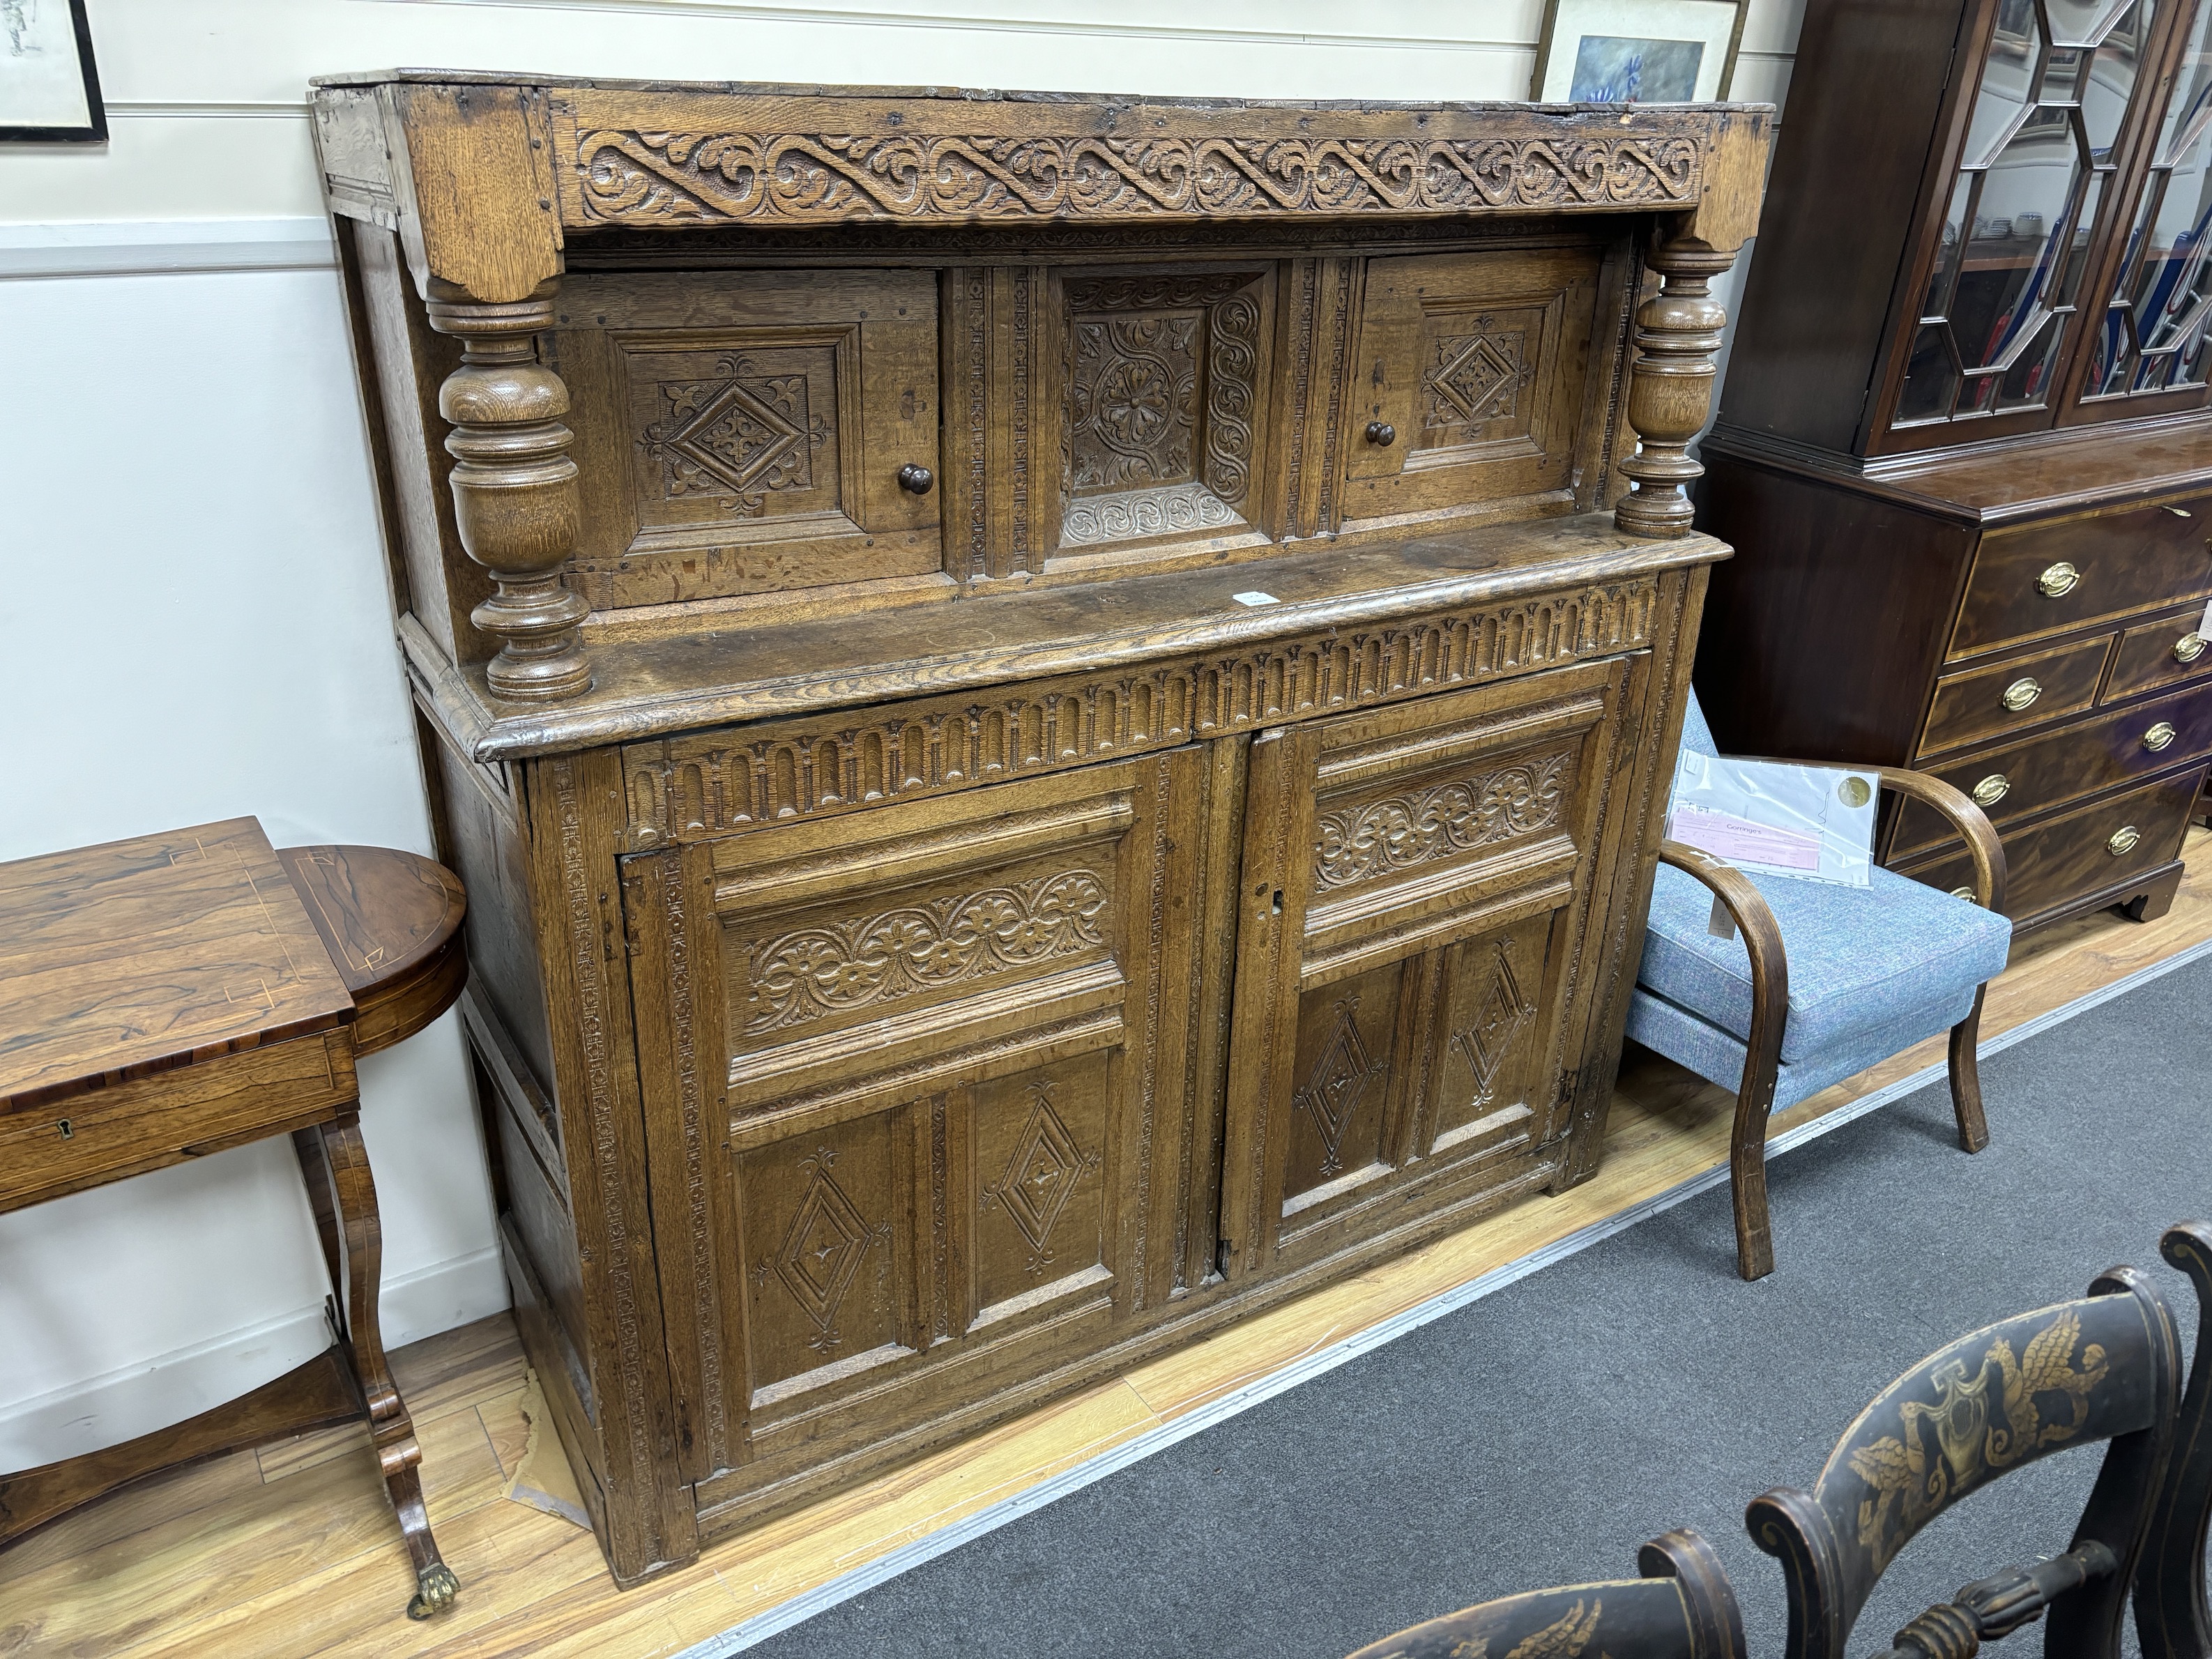 A late 17th century Yorkshire oak court cupboard, width 146cm, depth 50cm, height 146cm, Provenance- Brede Place, East Sussex, a former residence of the Frewen family from 1712-1936.